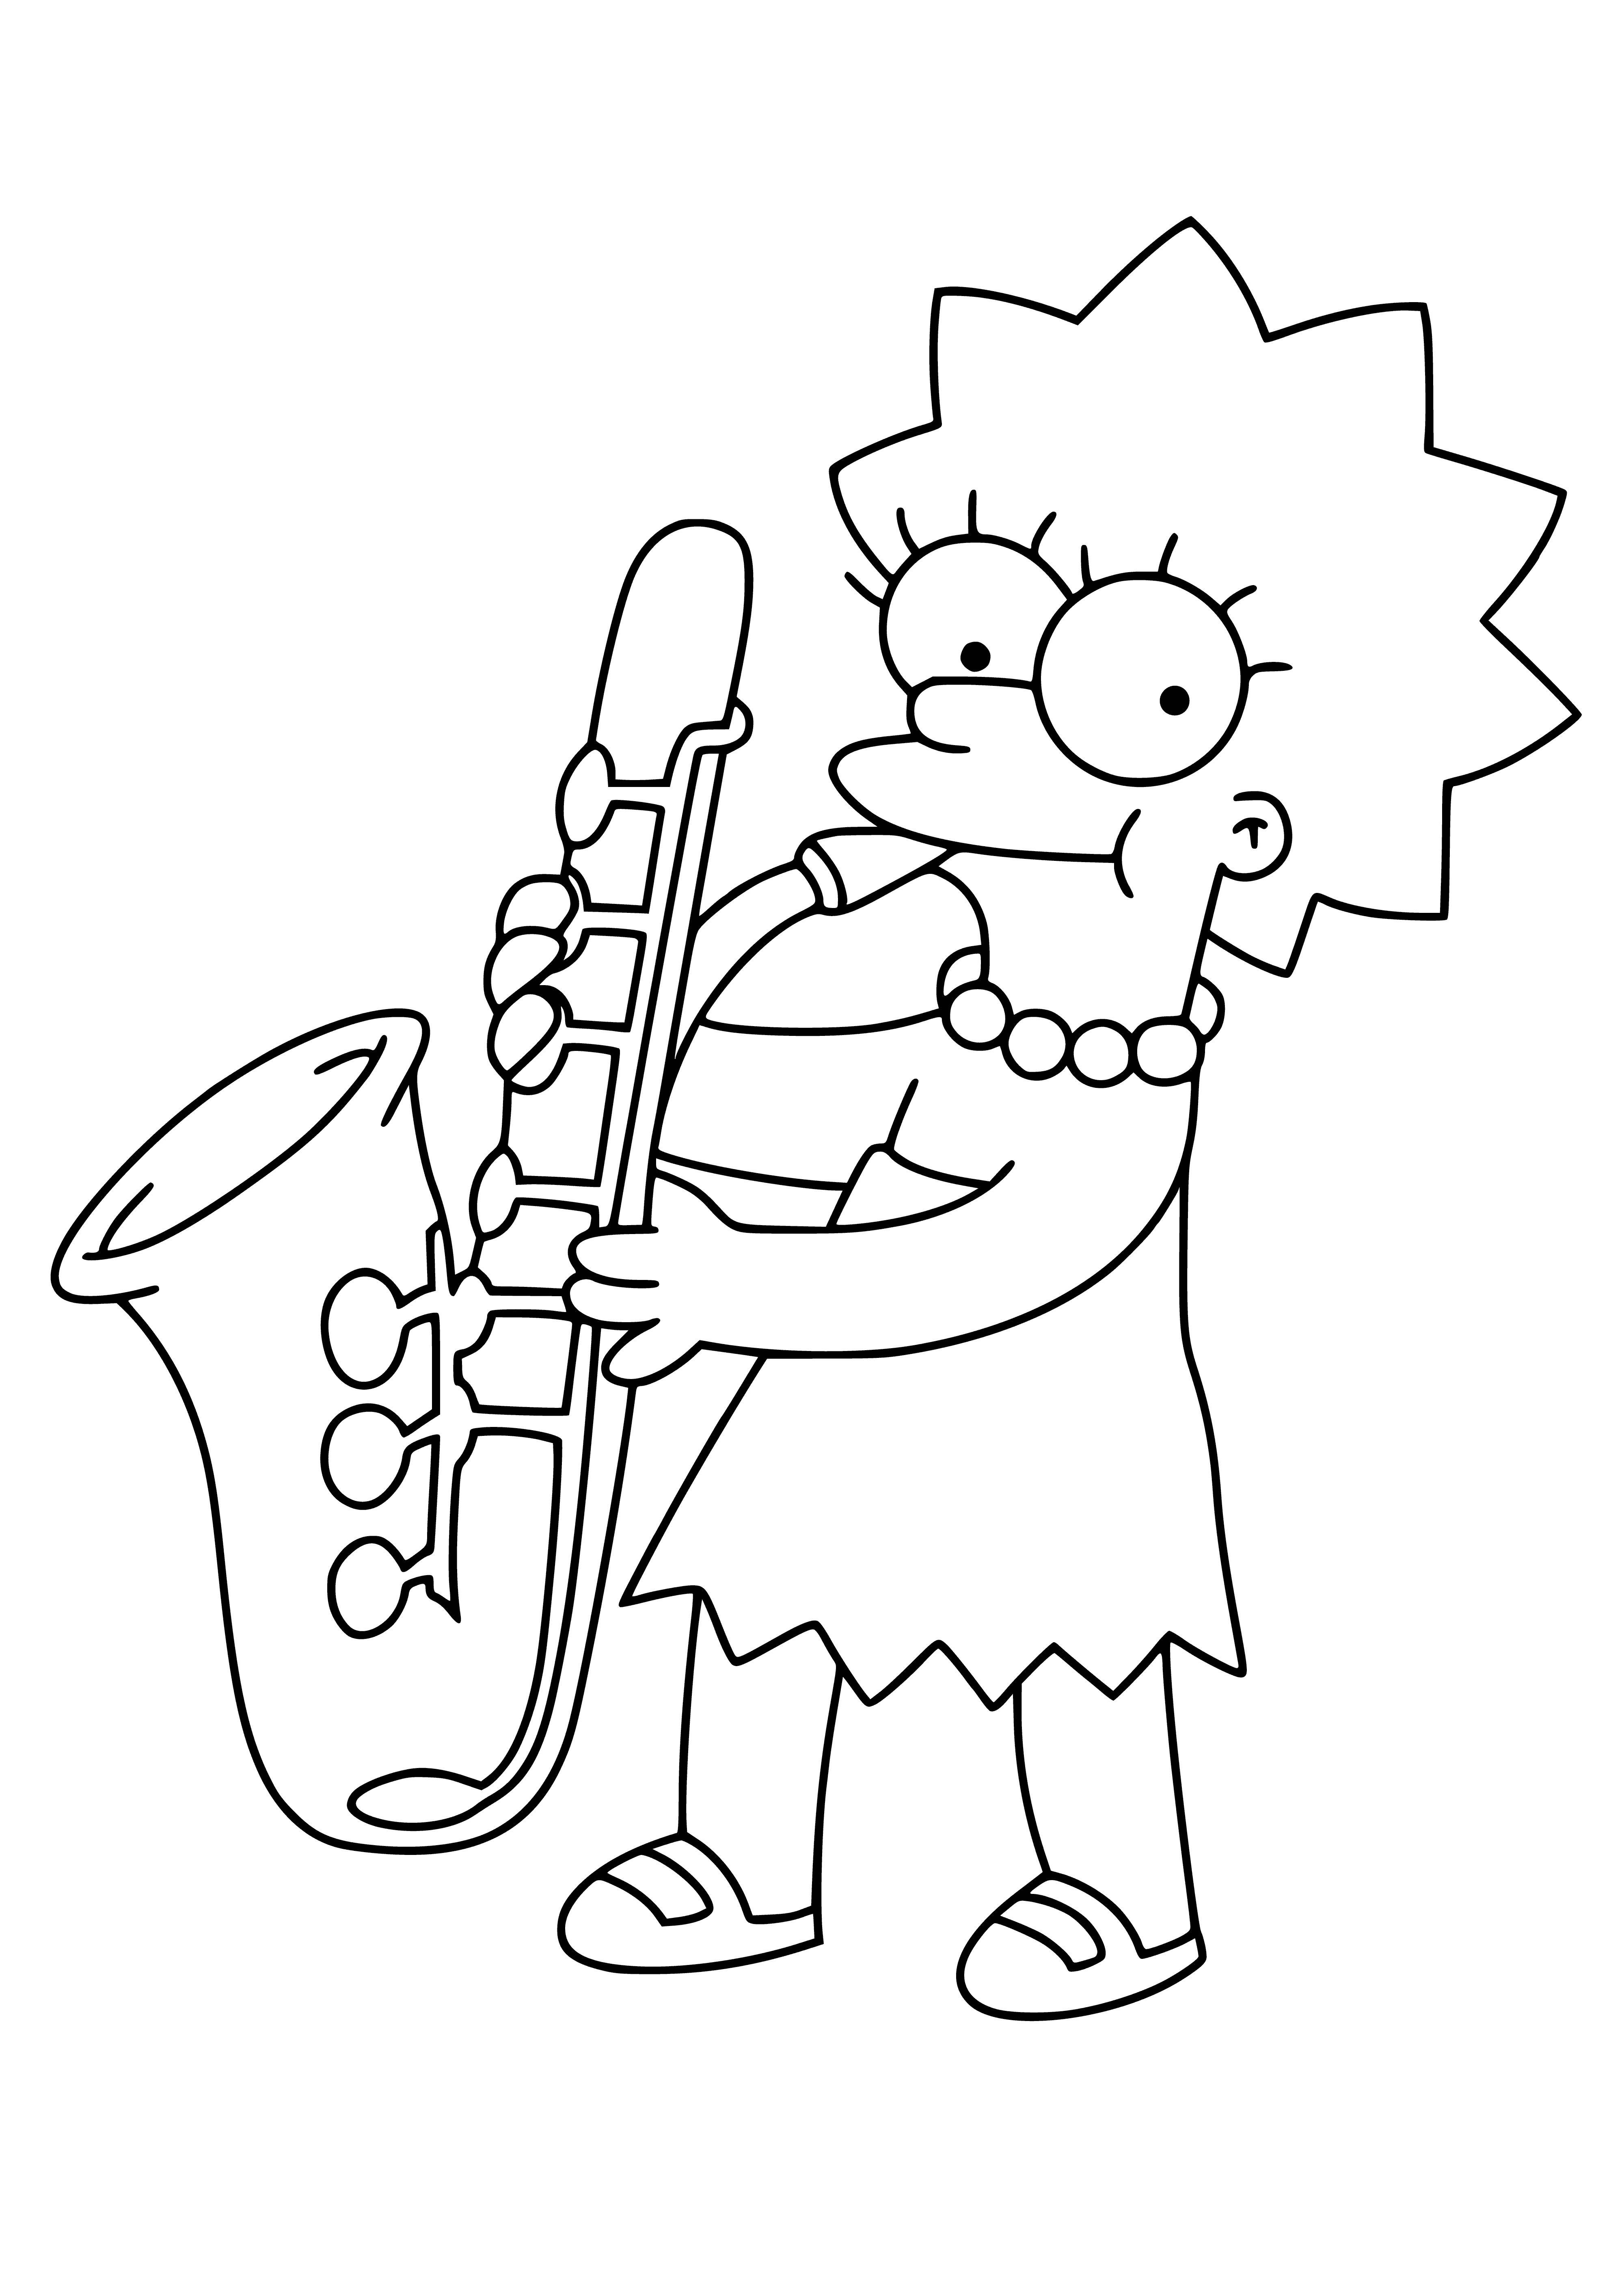 Lisa with a saxophone coloring page